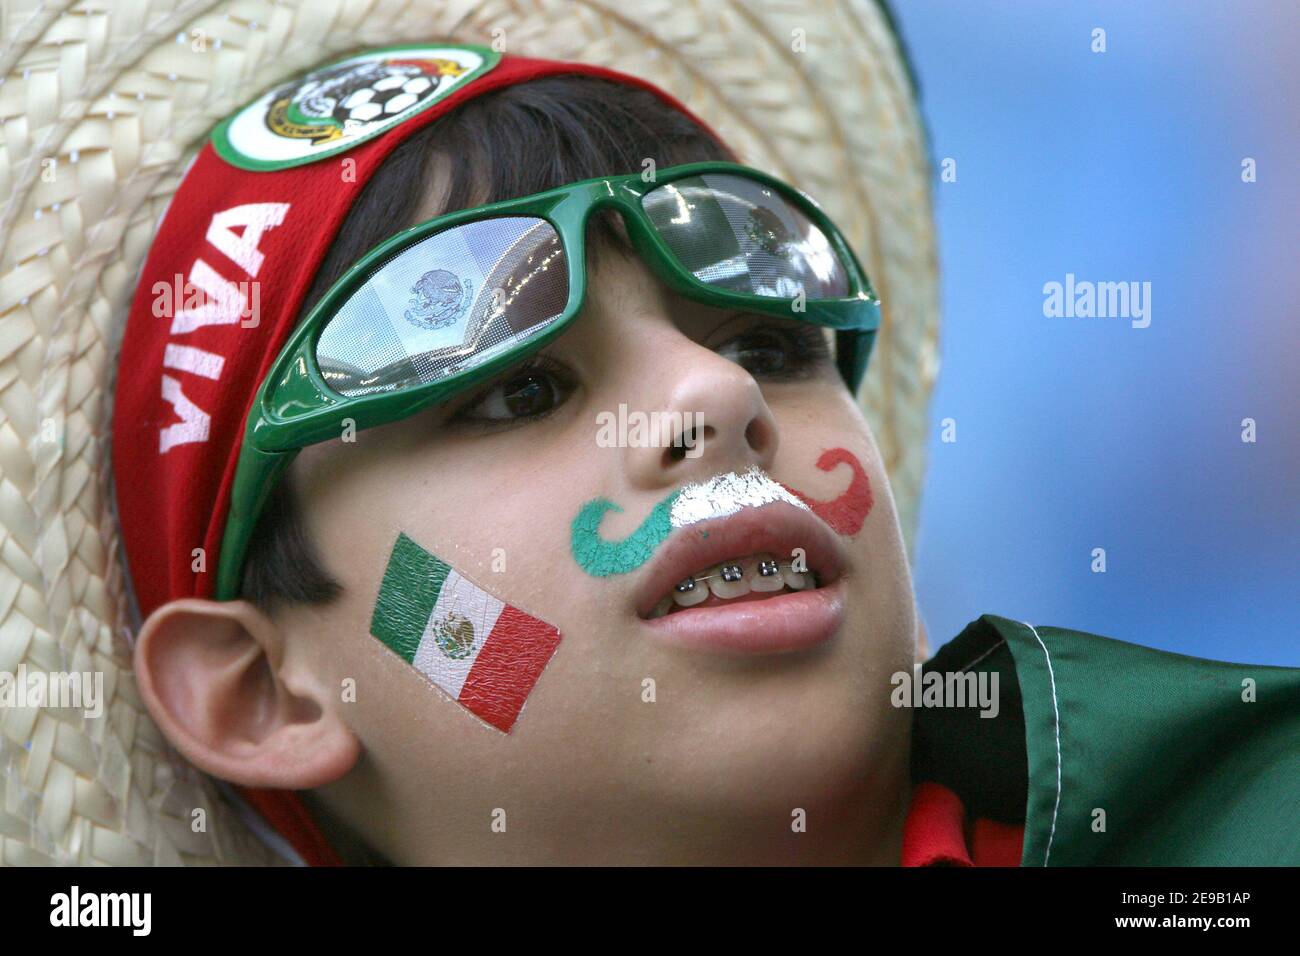 A Mexico's fan during the World Cup 2006, Second round, Argentina vs Mexico at the Zentralstadion stadium in Leipzig, Germany on June 24, 2006. Argentina won 2-1. Photo by Gouhier-Hahn-Orban/Cameleon/ABACAPRESS.COM Stock Photo